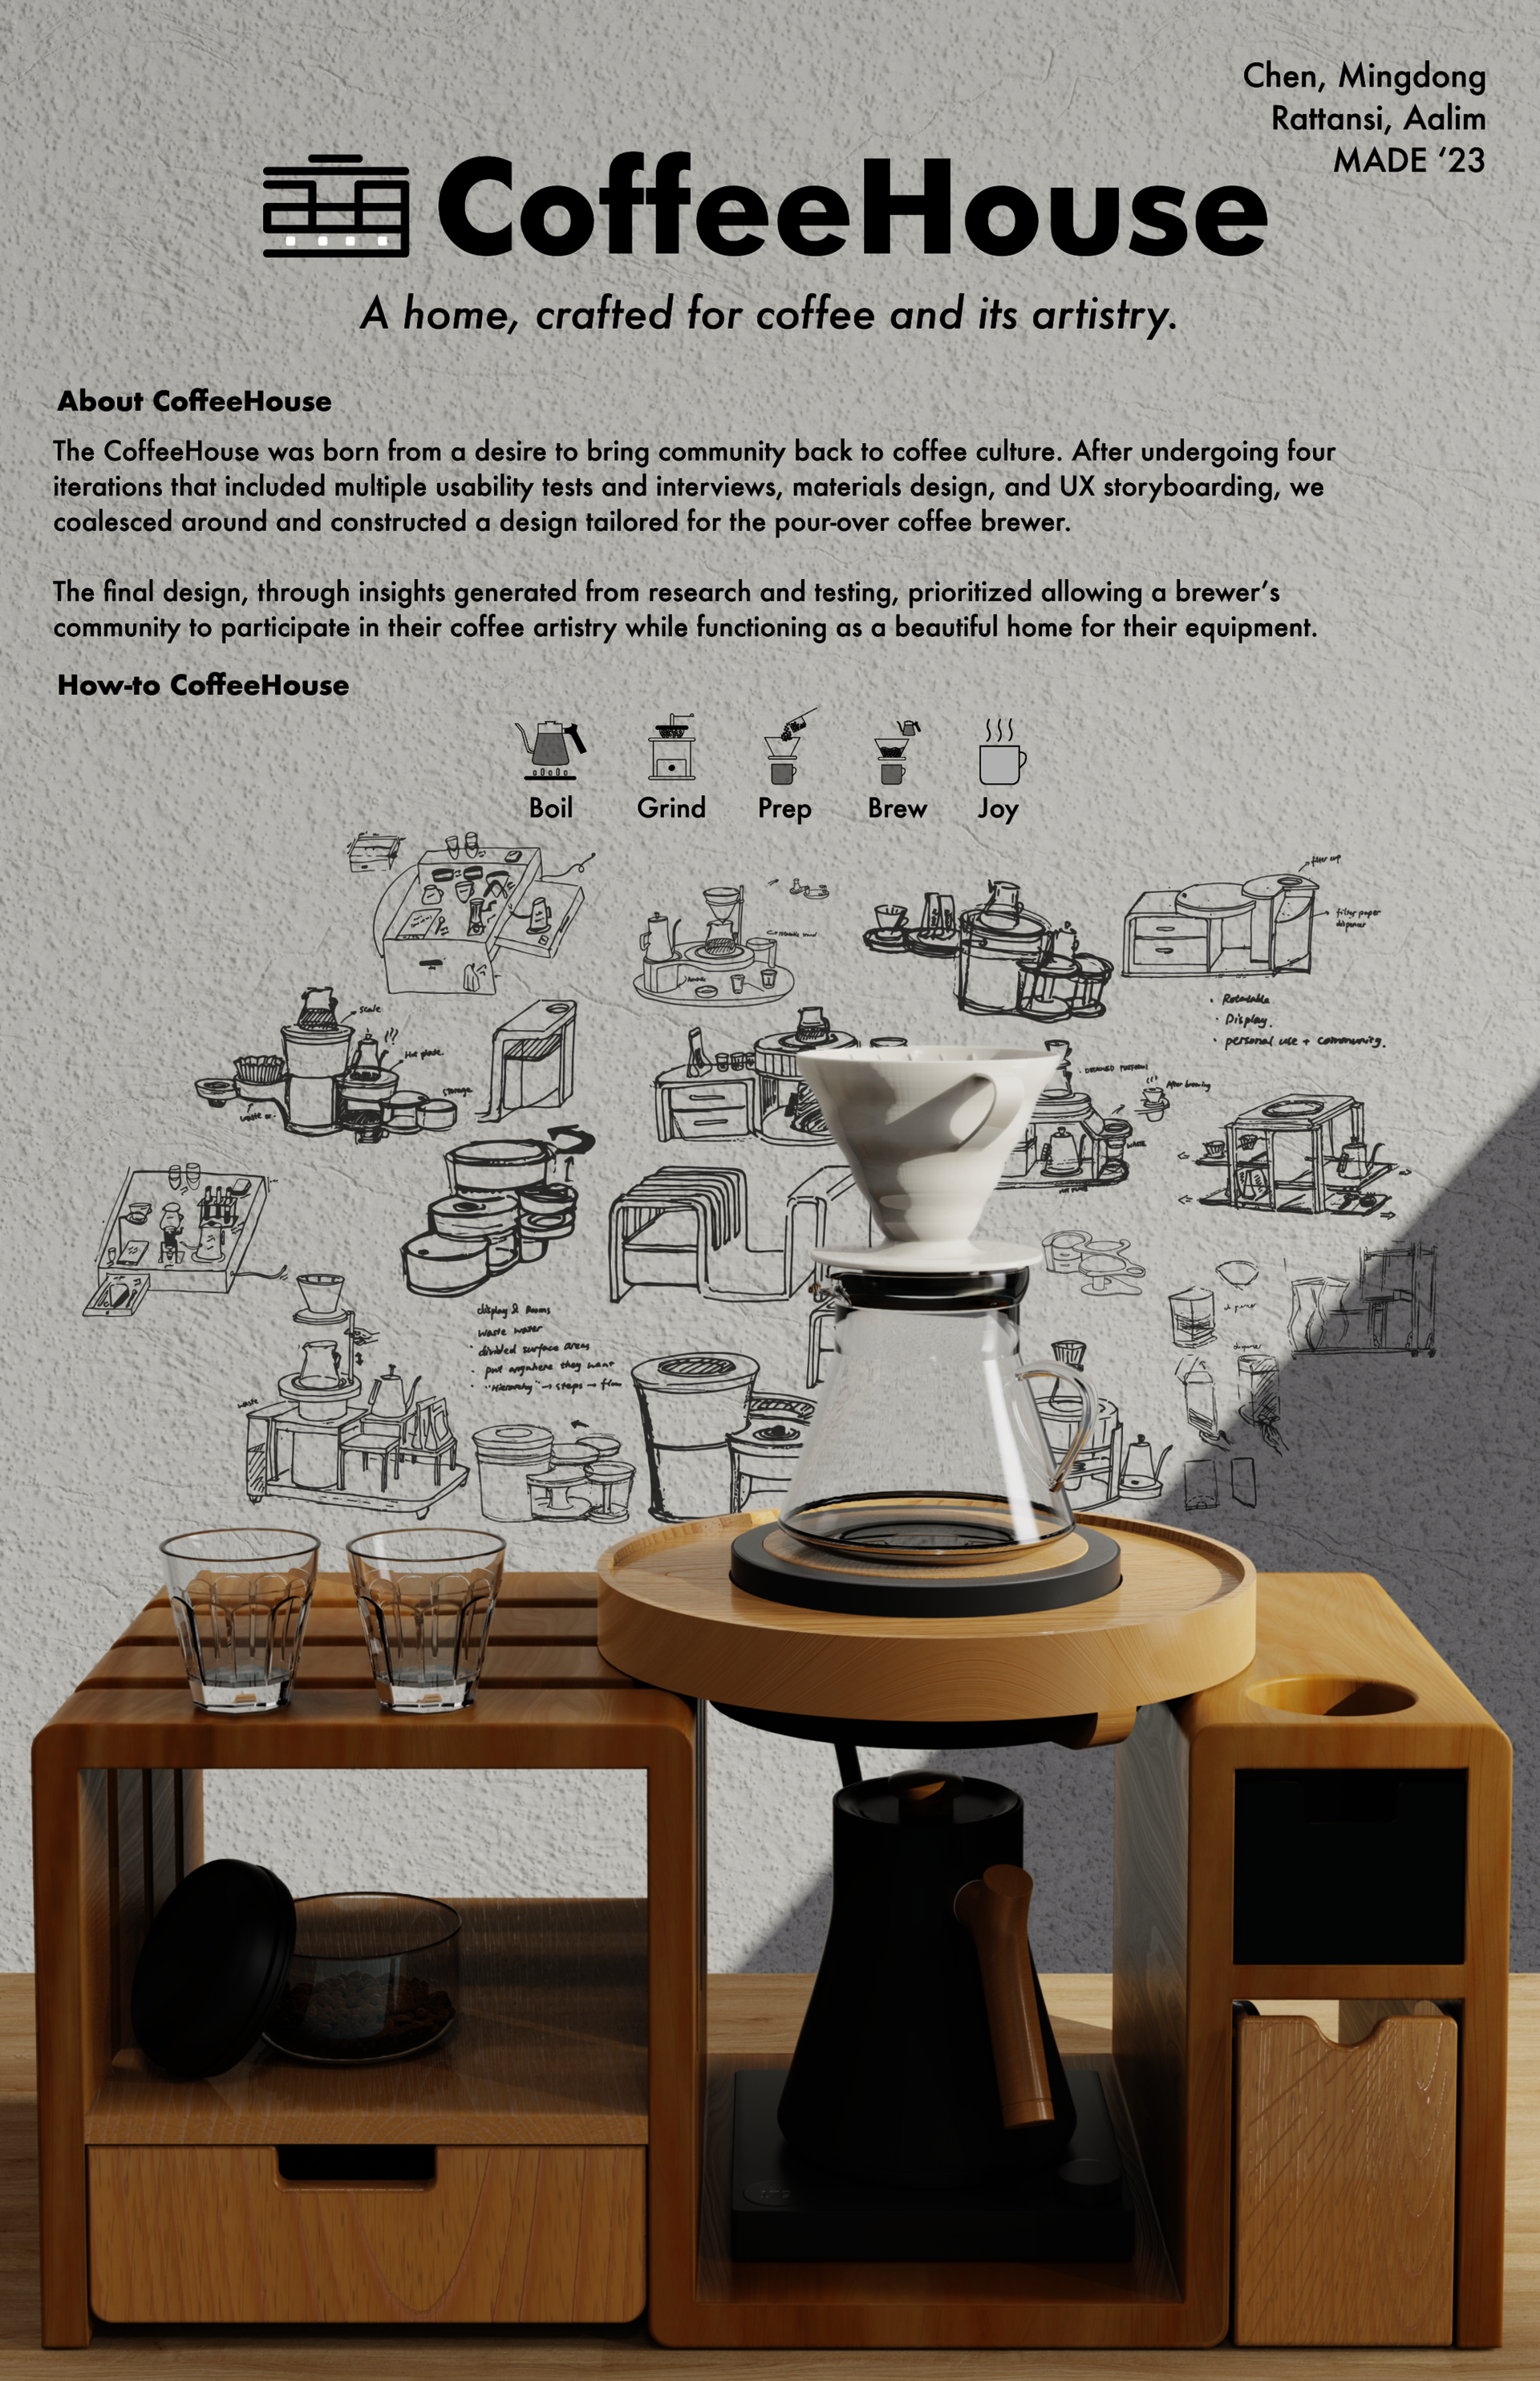 poster of coffeehouse